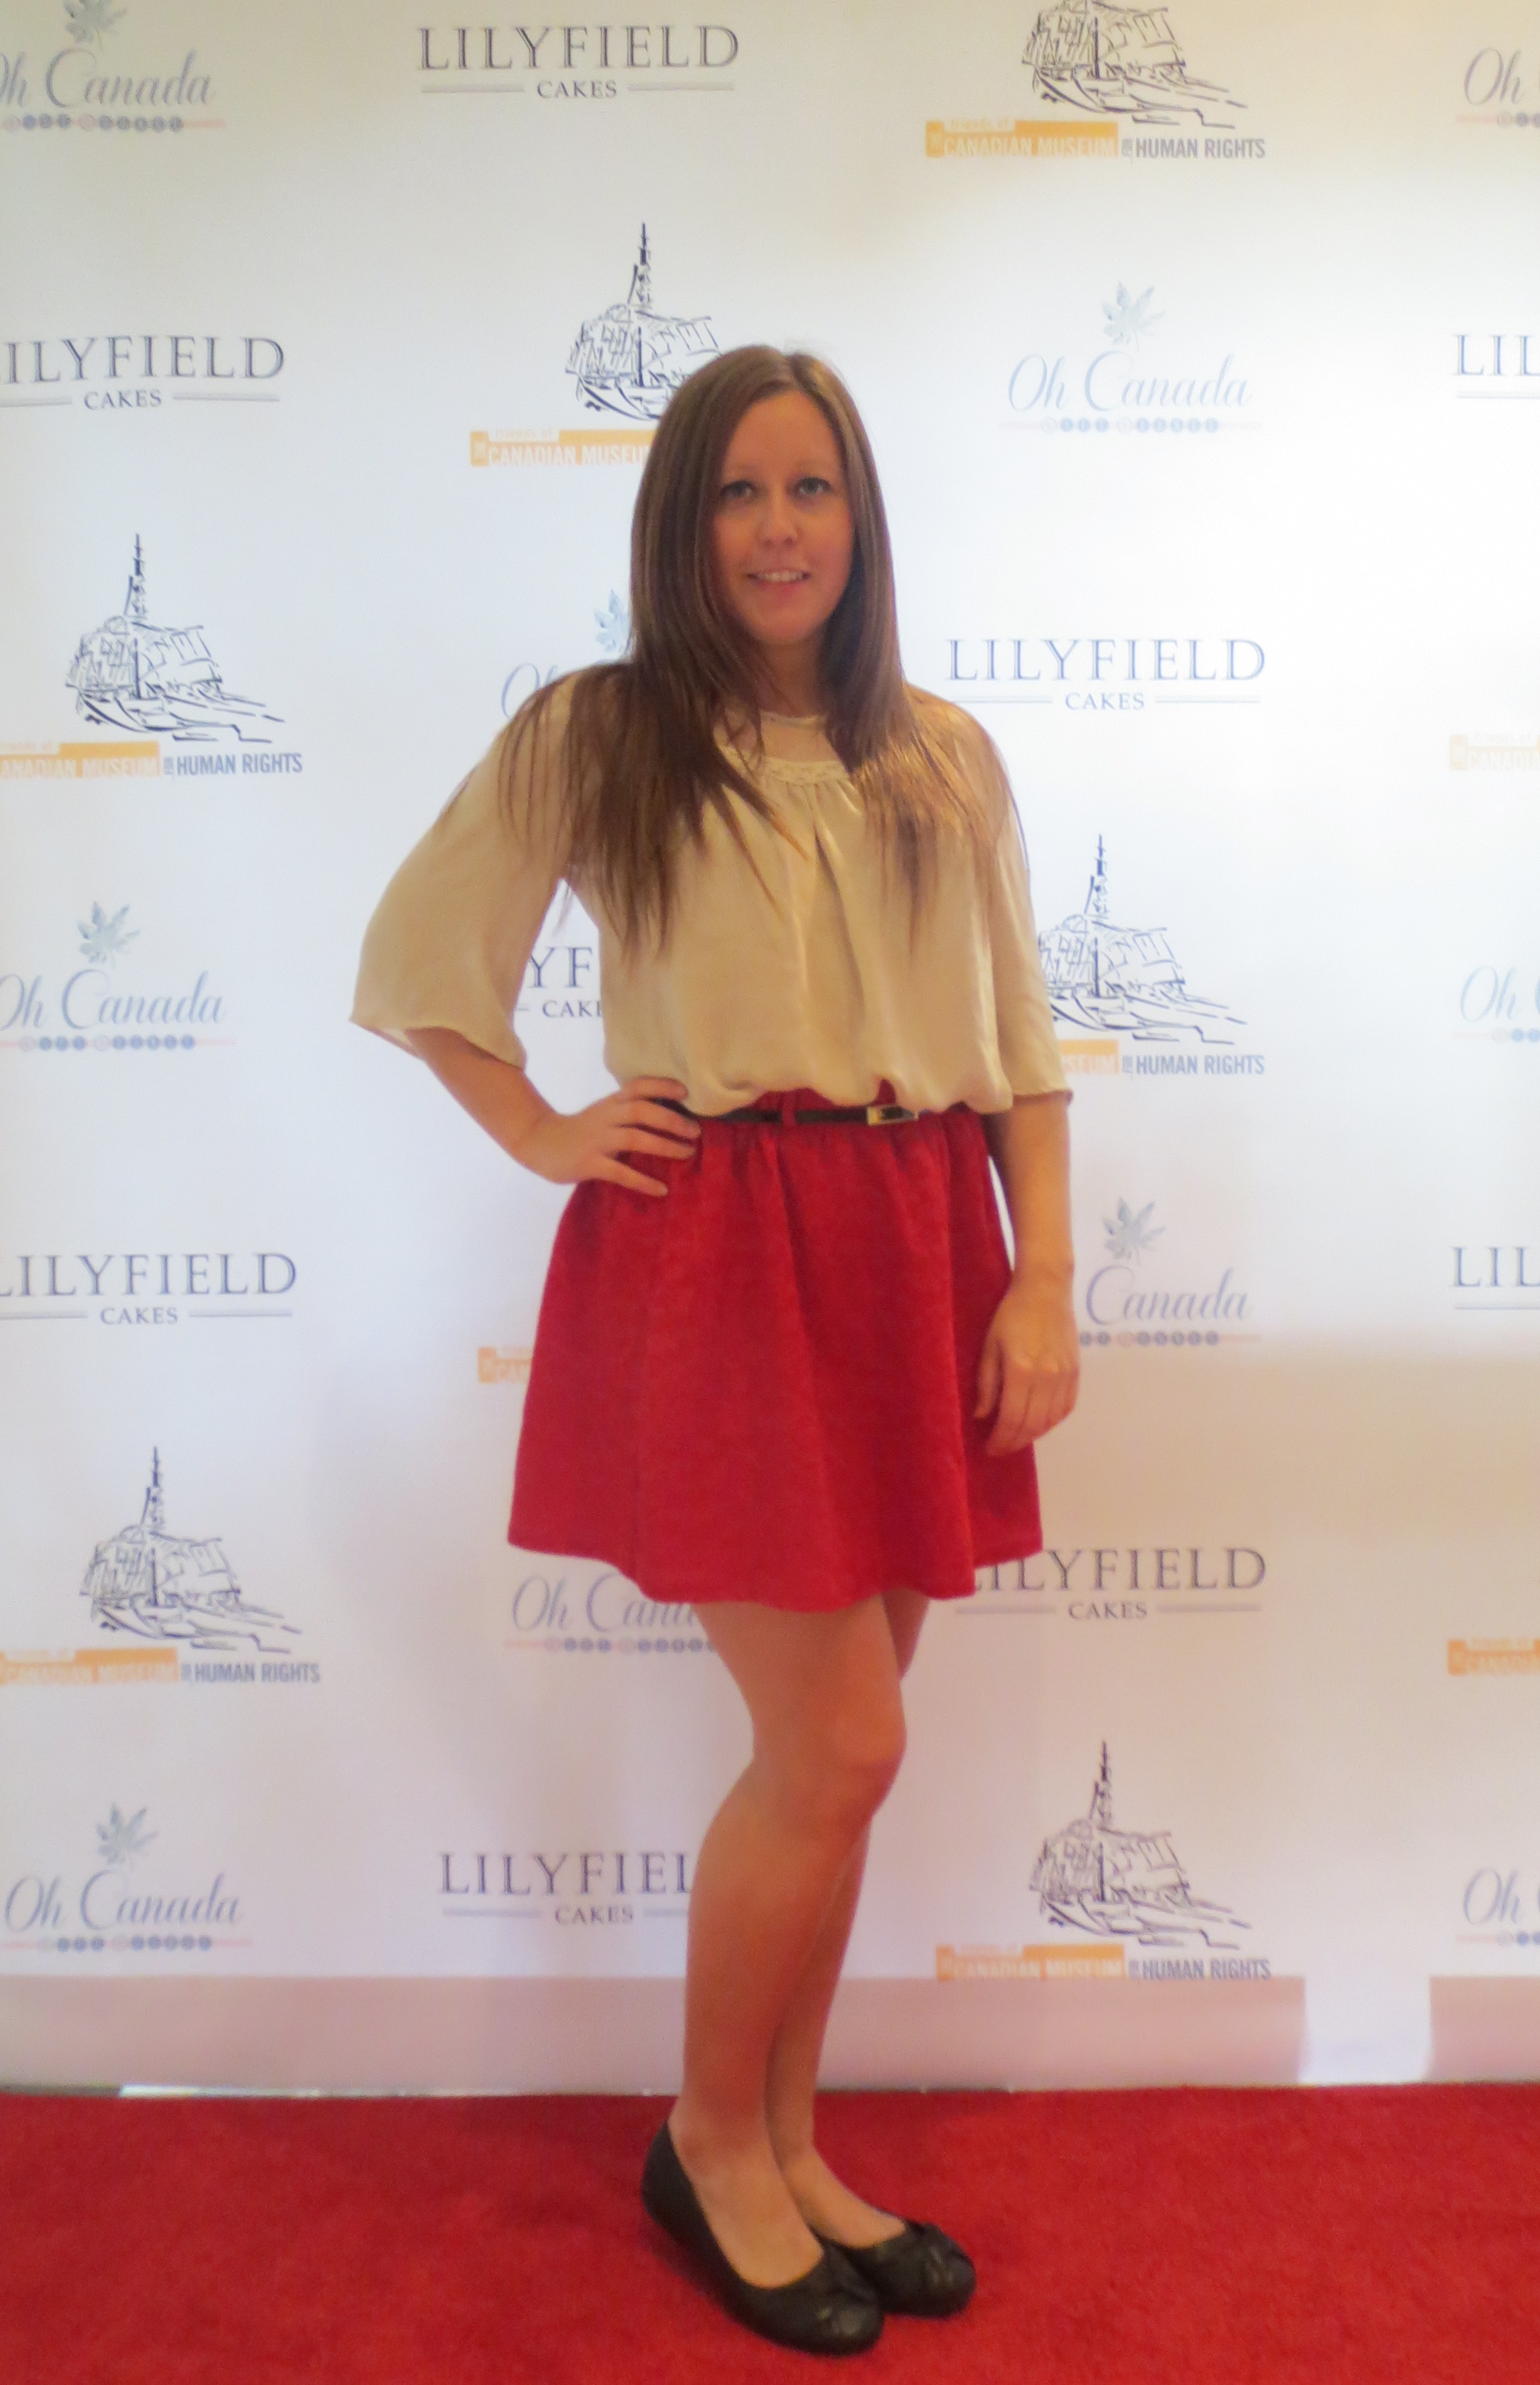 2014 Golden Globes gifting Suite, Peninsula Hotel Beverly Hills.